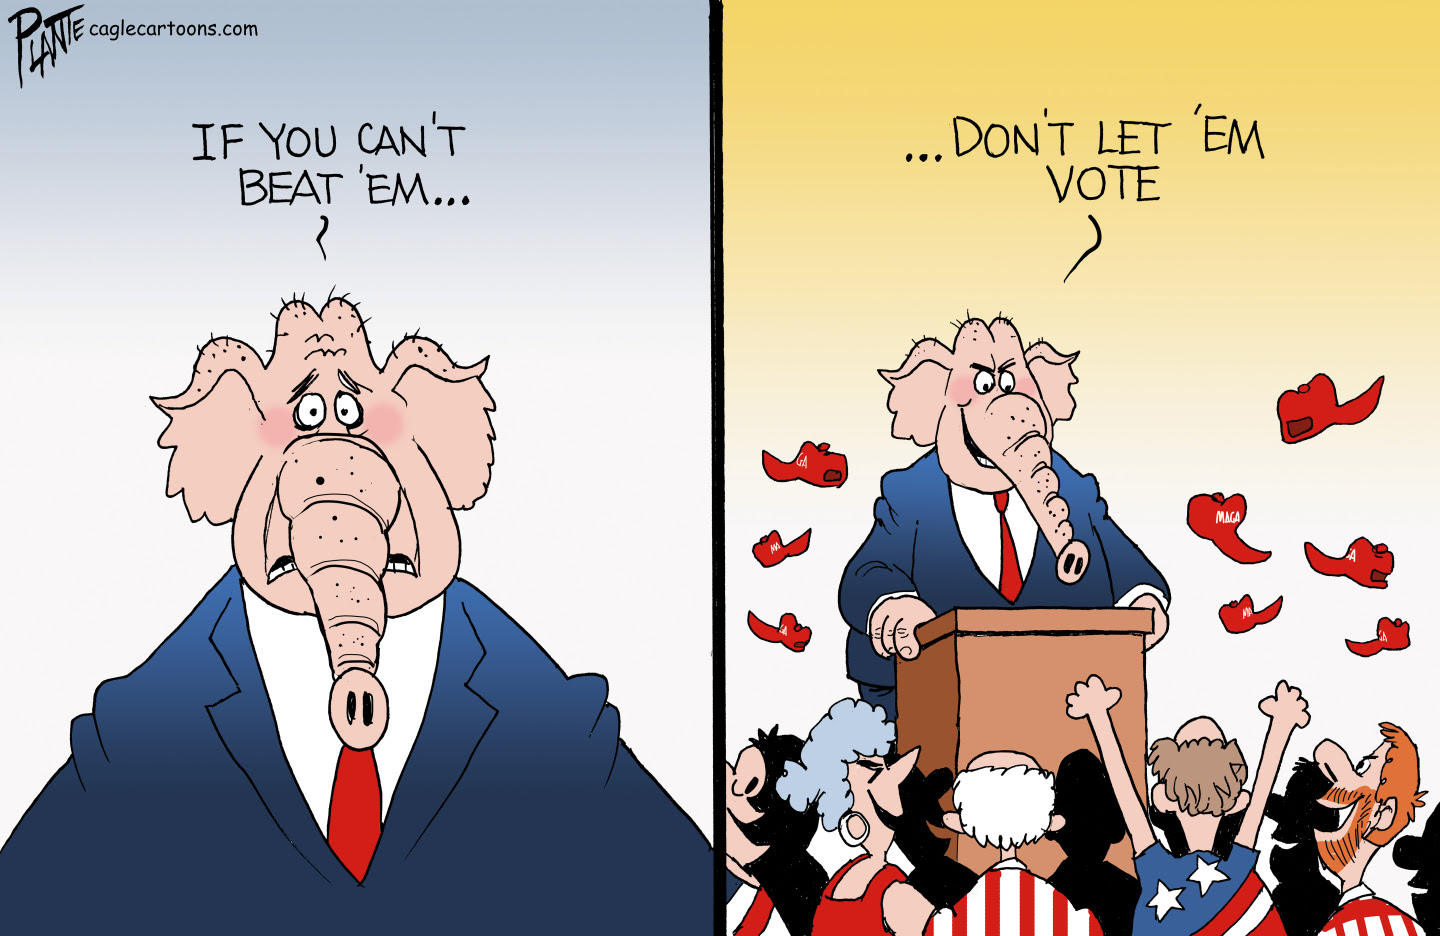 Republicans rely on voter suppression to cling to office. If you can't beat 'em…, voter suppression ,voting rights, Republican Party, GOP, RNC, racial, don’t let ‘em vote, 1965 Voting Rights Act, democracy